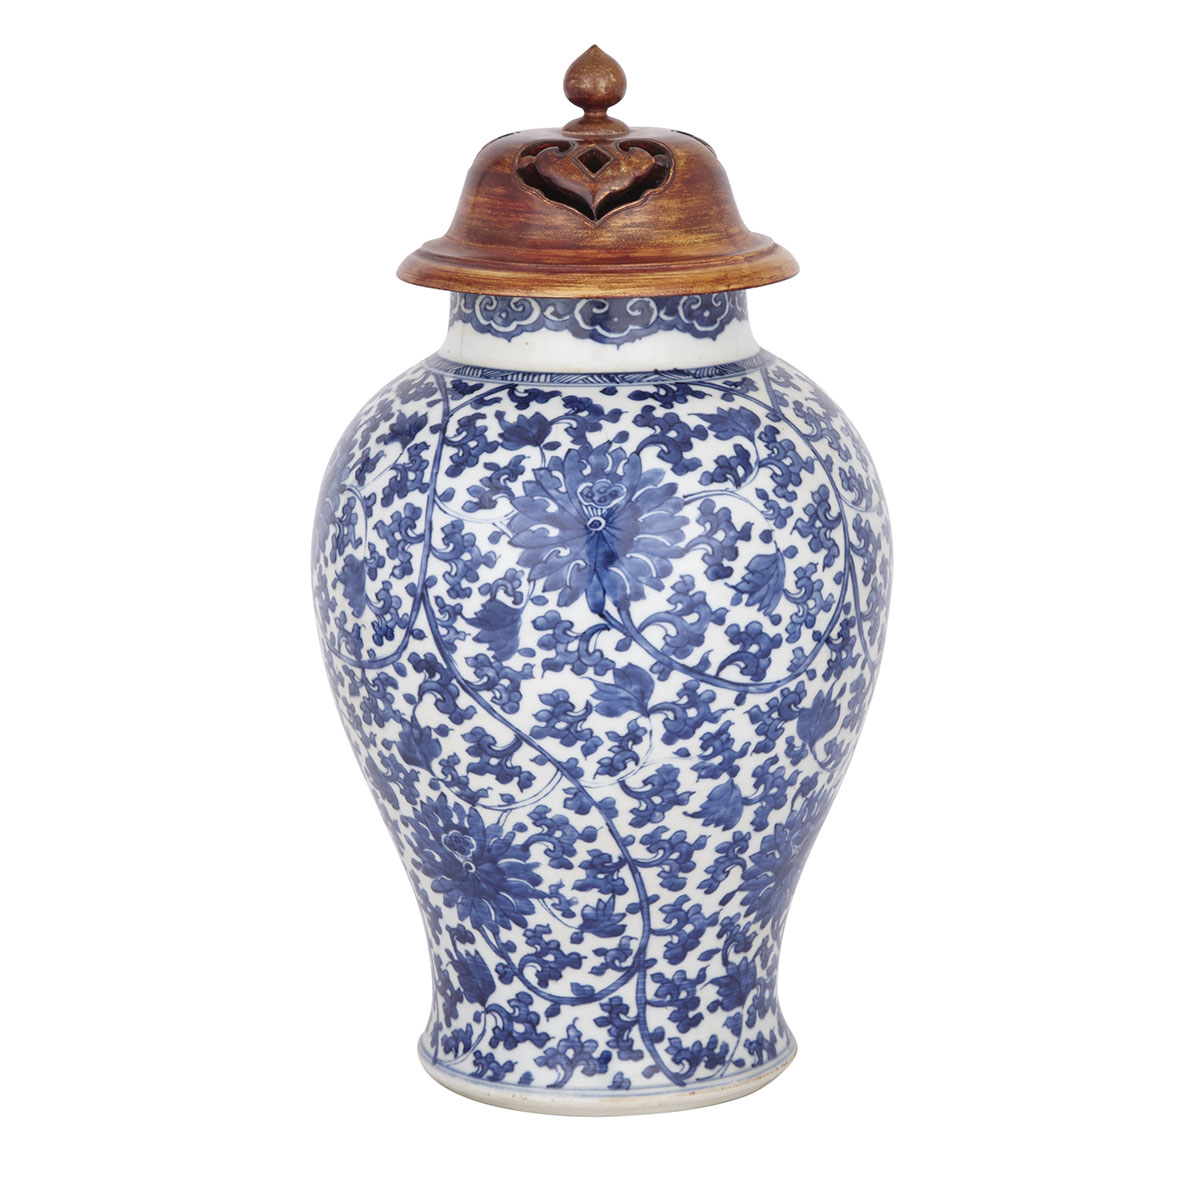 A Large Blue and White Scrolling Lotus Jar and Cover, Kangxi Period (1662-1722)